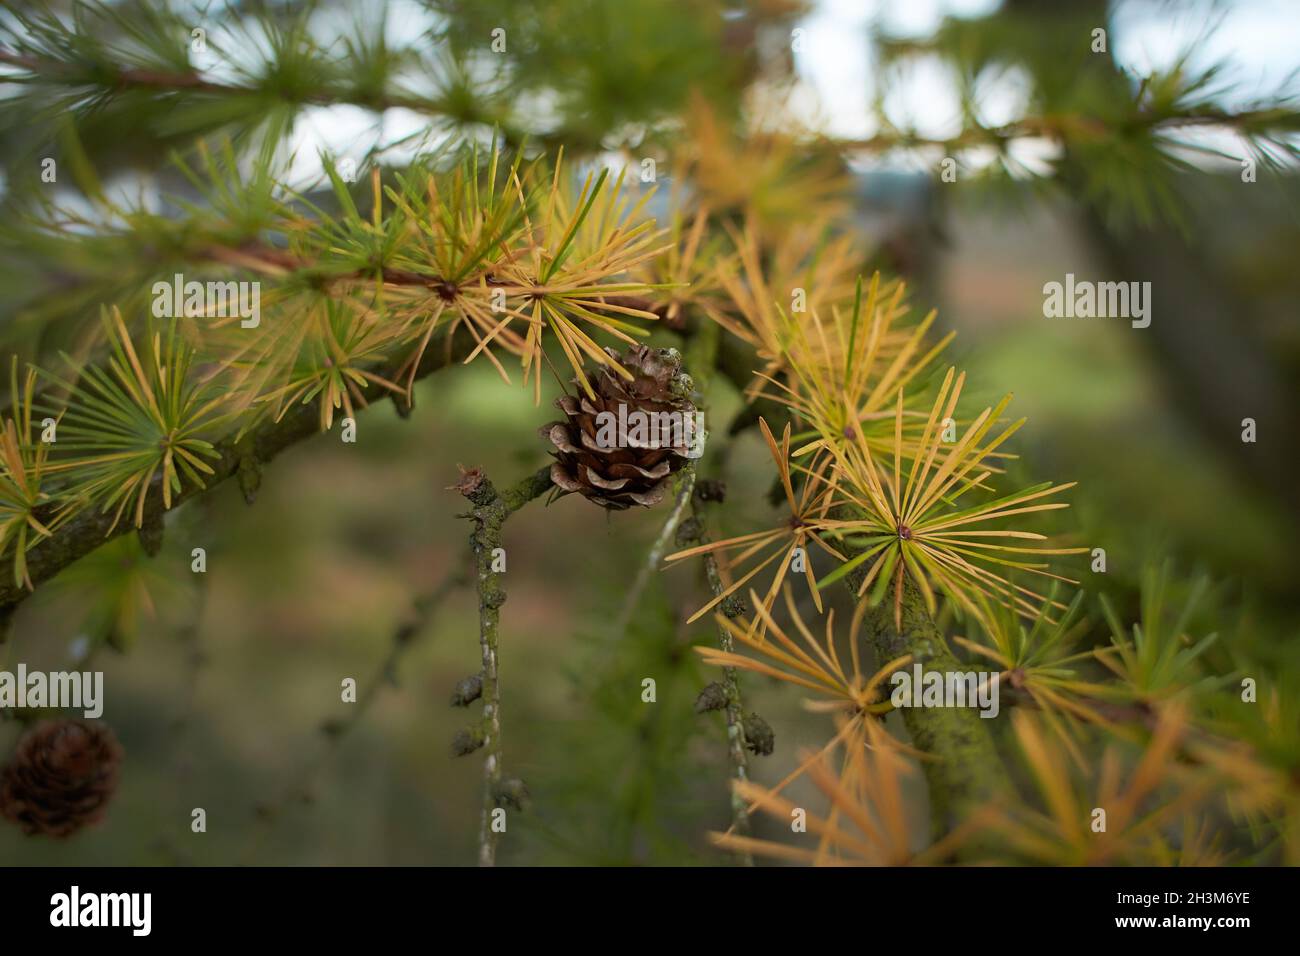 A plentiful amount of small pine cones are growing on the branch of this tree in a natural autumn forest setting. Stock Photo